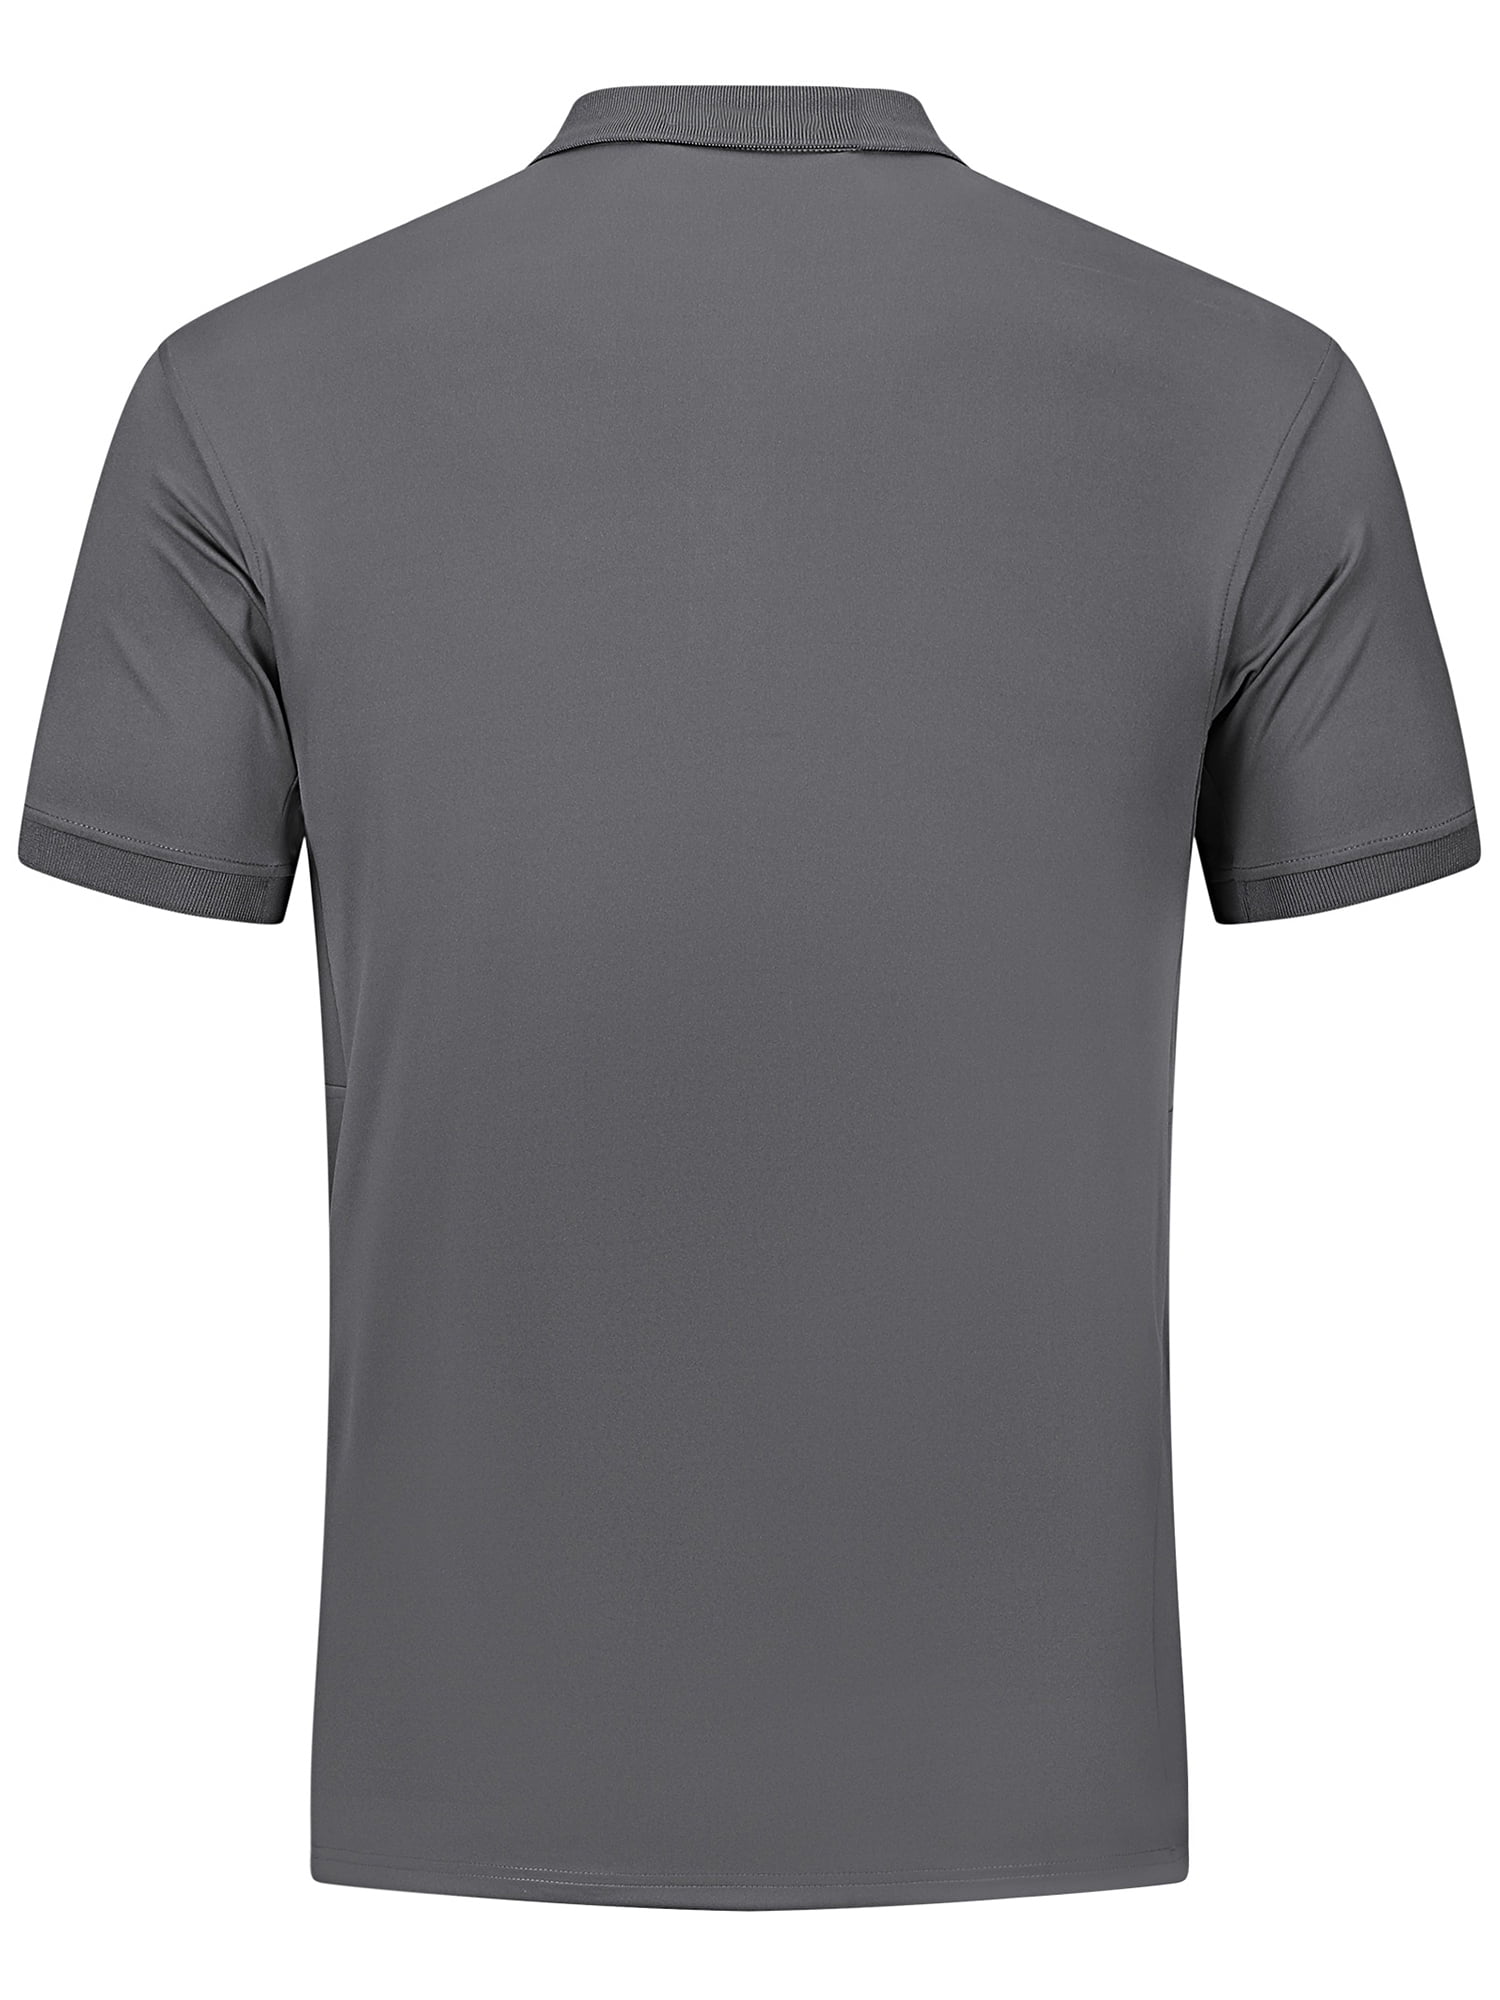 JIM LEAGUE Men's Golf Polo Shirts - Long/Short Sleeve Dry Fit Athletic  Tennis Polyester Shirt with Collar UPF50(Lightweight), Short Sleeve-grey,  3X-Large : Buy Online at Best Price in KSA - Souq is now : Fashion